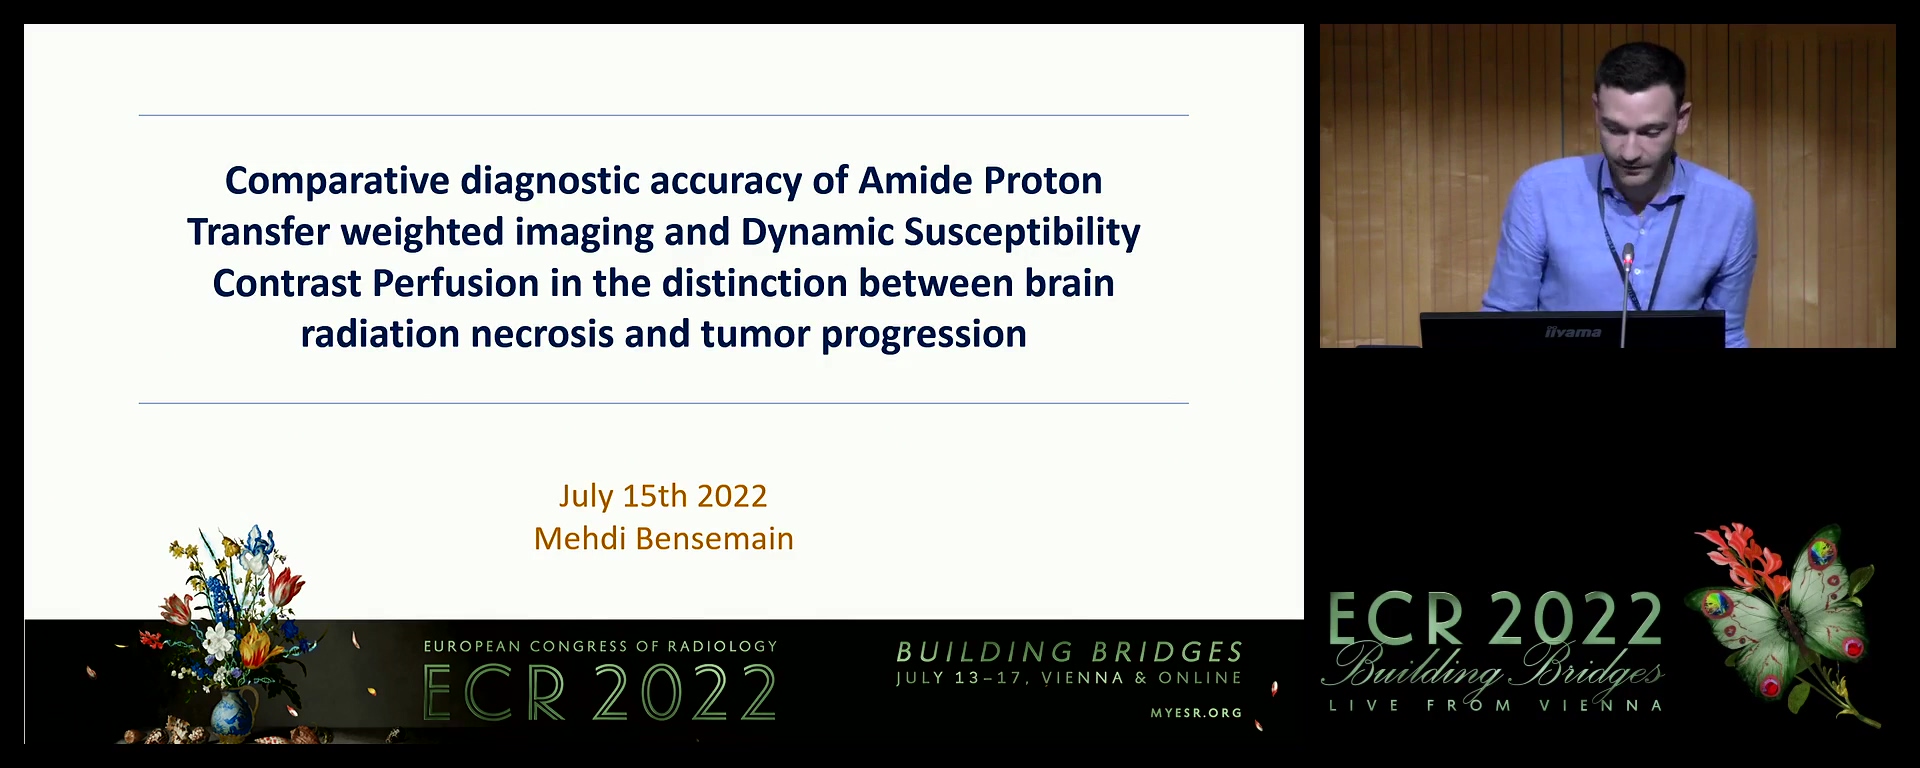 Comparative diagnostic accuracy of amide proton transfer-weighted imaging and dynamic susceptibility contrast perfusion in the distinction between brain radiation necrosis and tumour progression